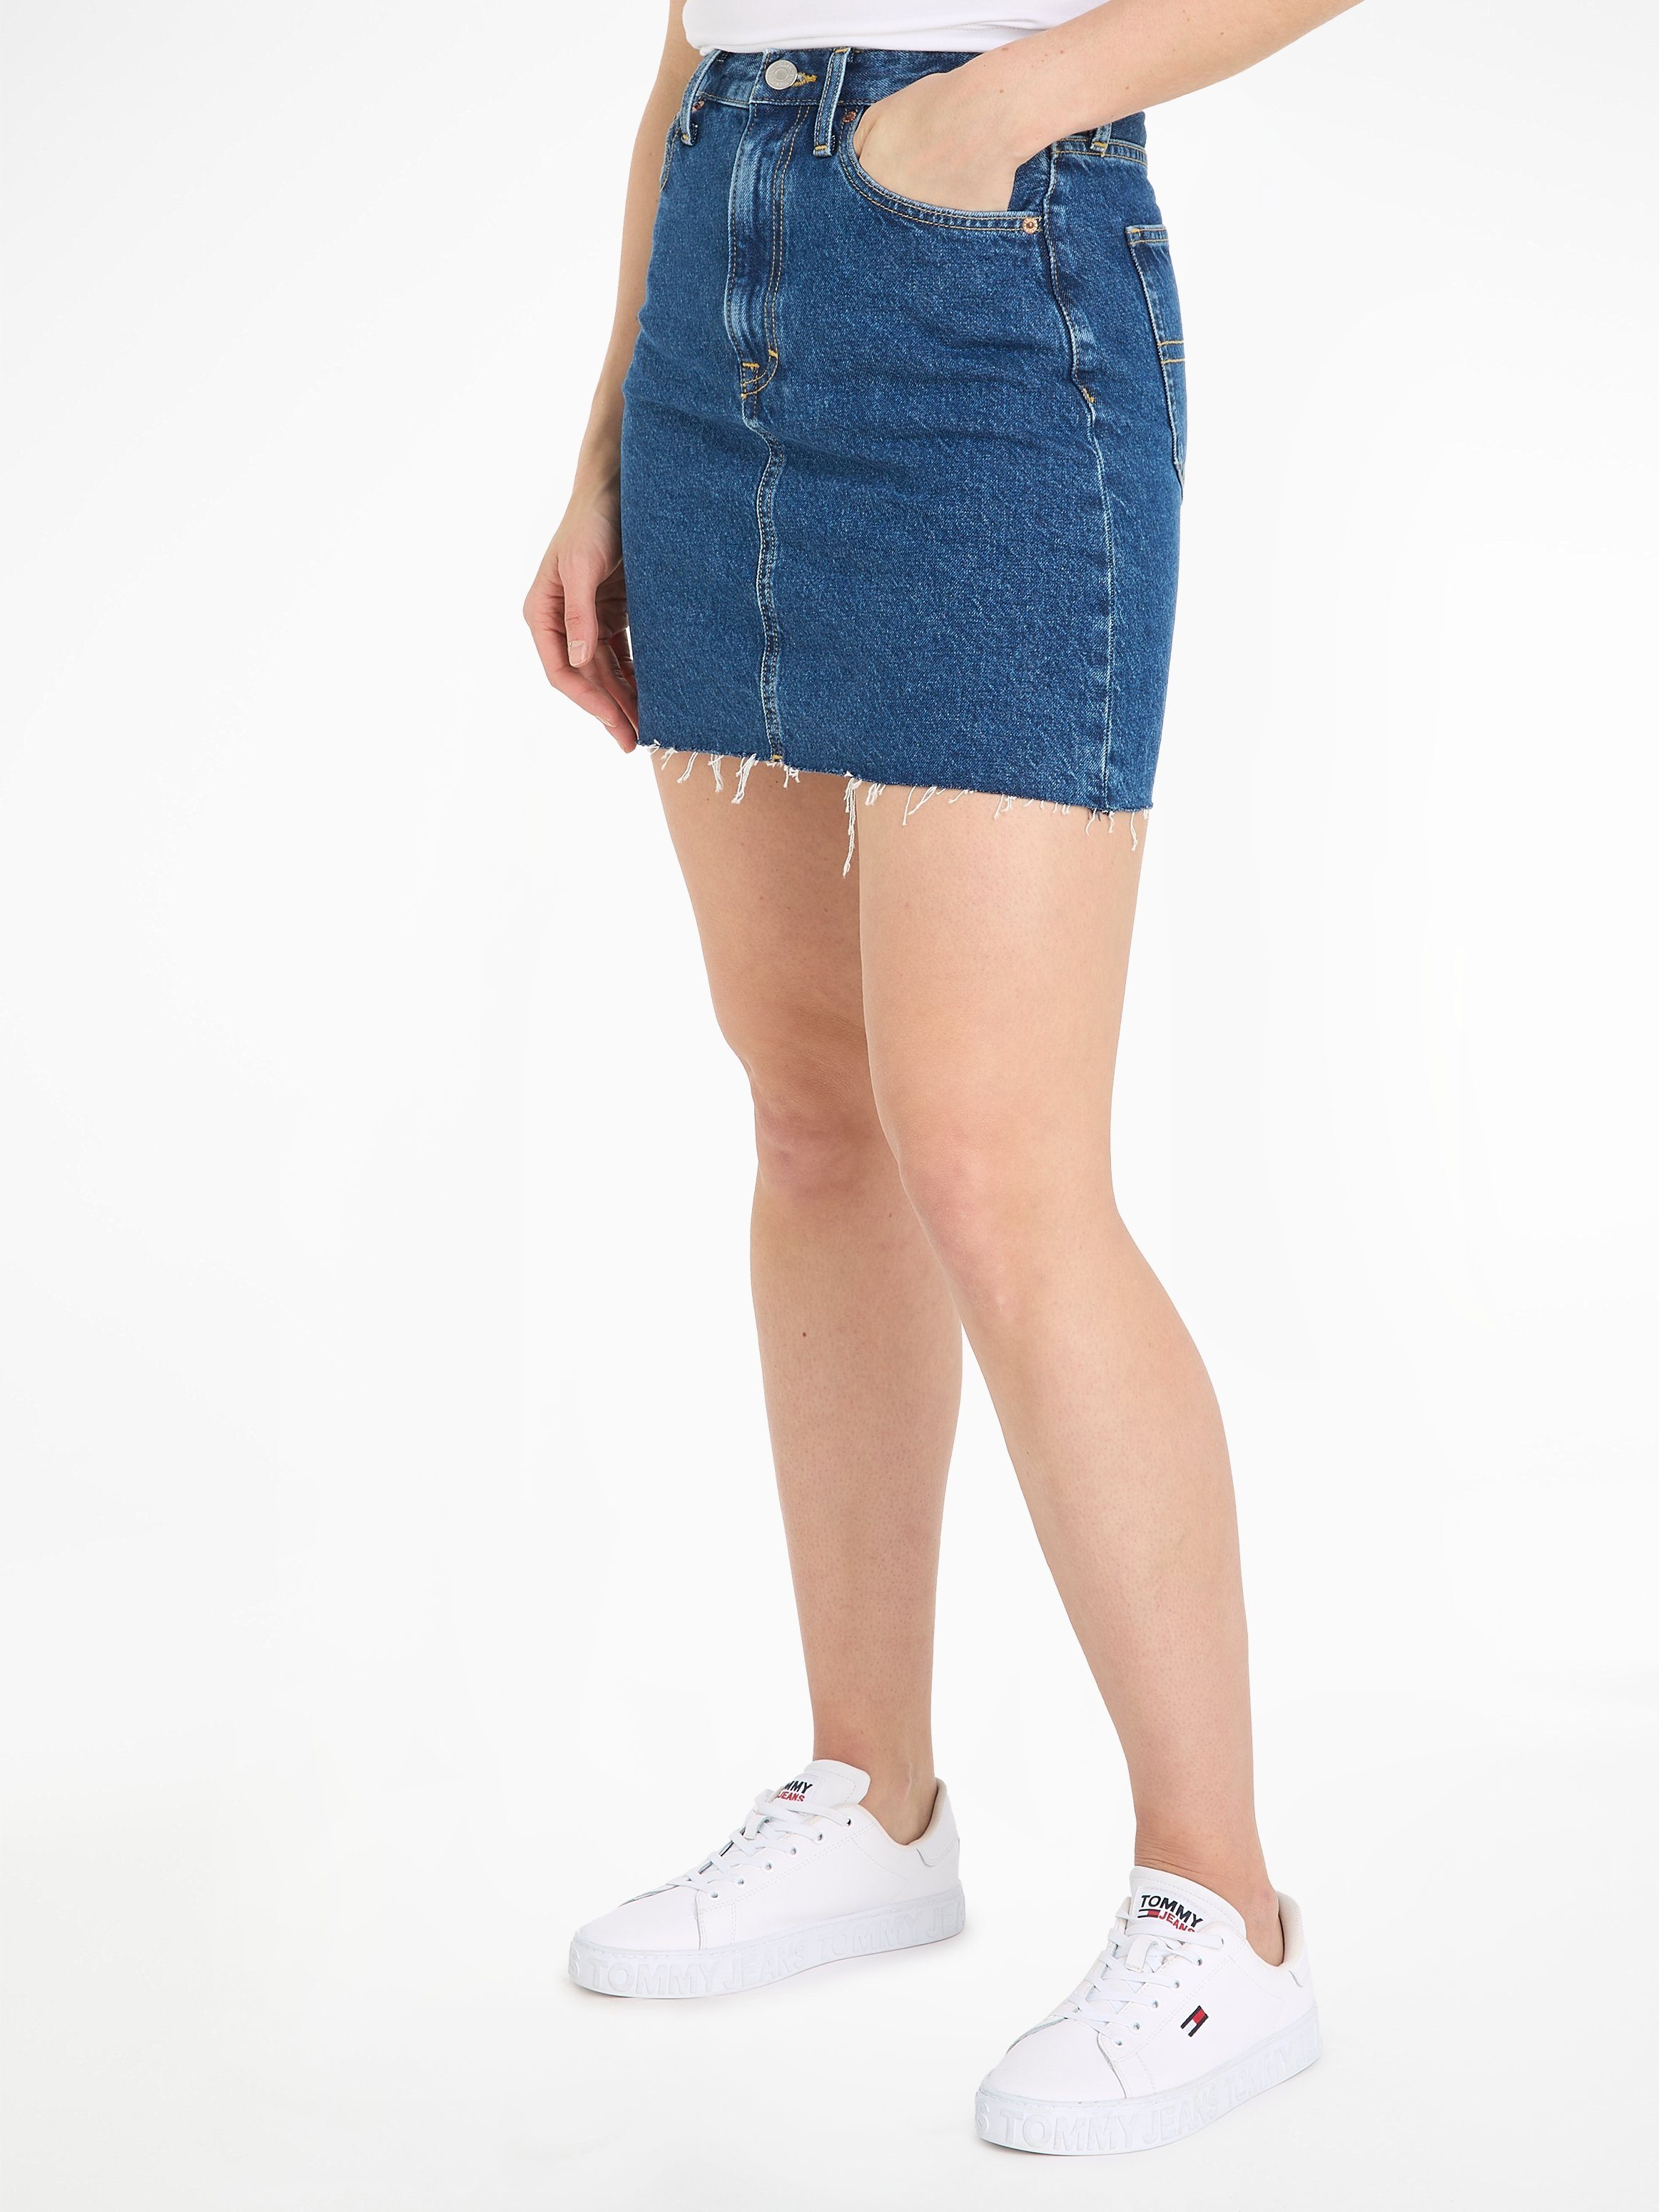 mit Tommy UH Logostickerei Jeans Jeansrock MOM SKIRT AH4035